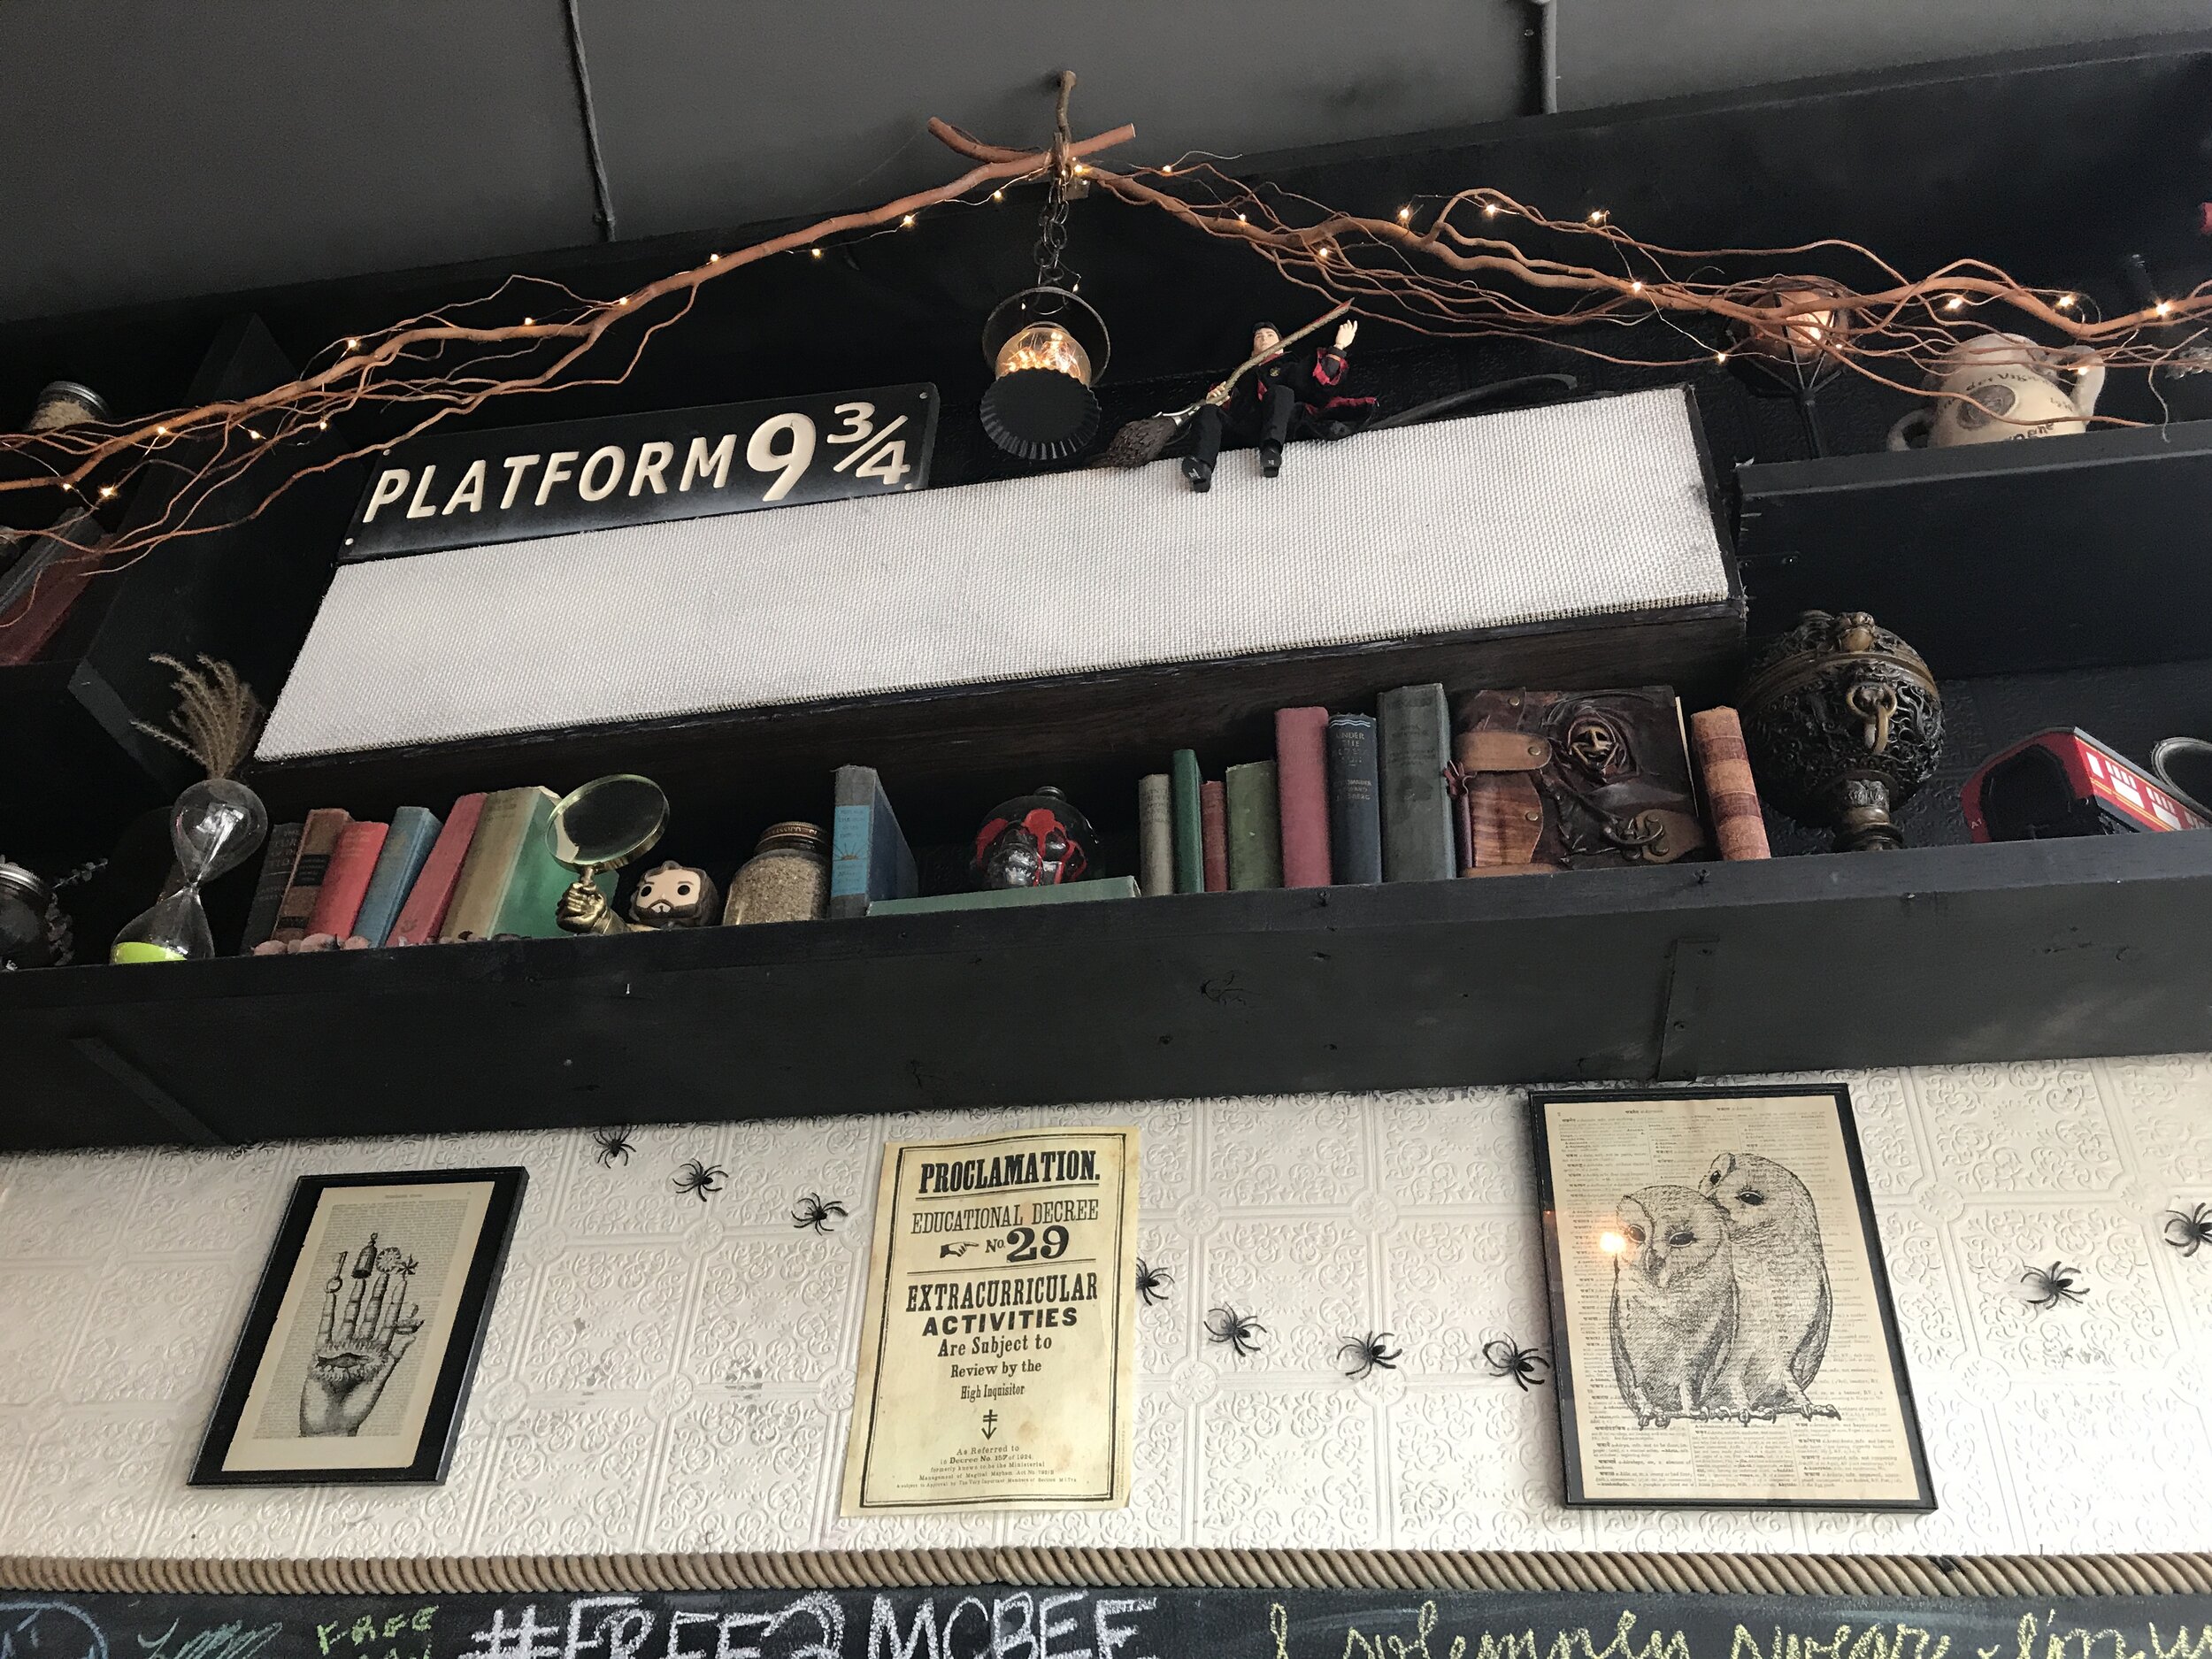 The Lockhart is a Harry Potter themed restaurant and bar in Toronto, Canada